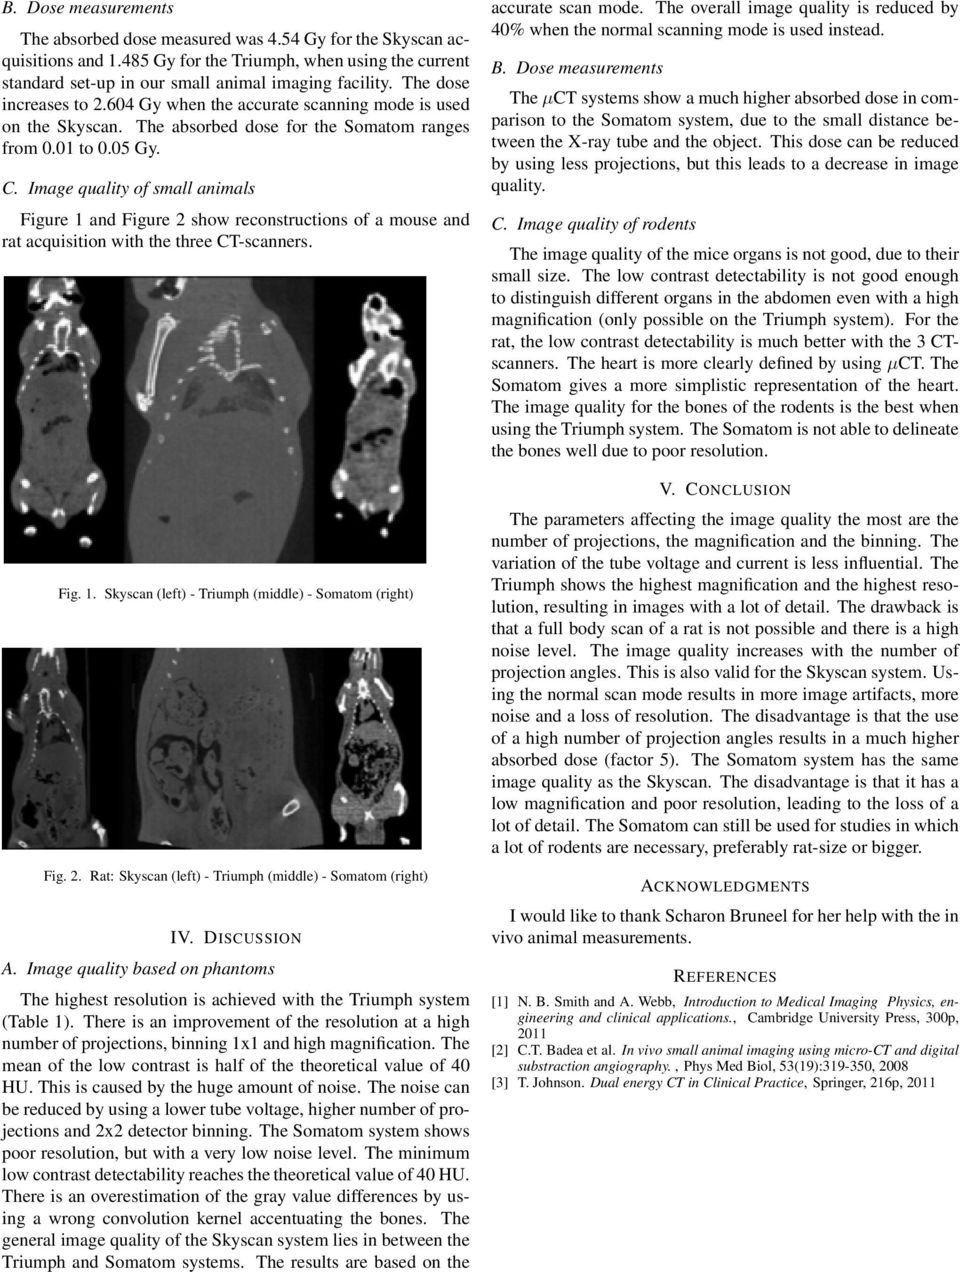 Image quality of small animals Figure 1 and Figure 2 show reconstructions of a mouse and rat acquisition with the three CT-scanners. Fig. 1. Skyscan (left) - Triumph (middle) - Somatom (right) Fig. 2. Rat: Skyscan (left) - Triumph (middle) - Somatom (right) IV.